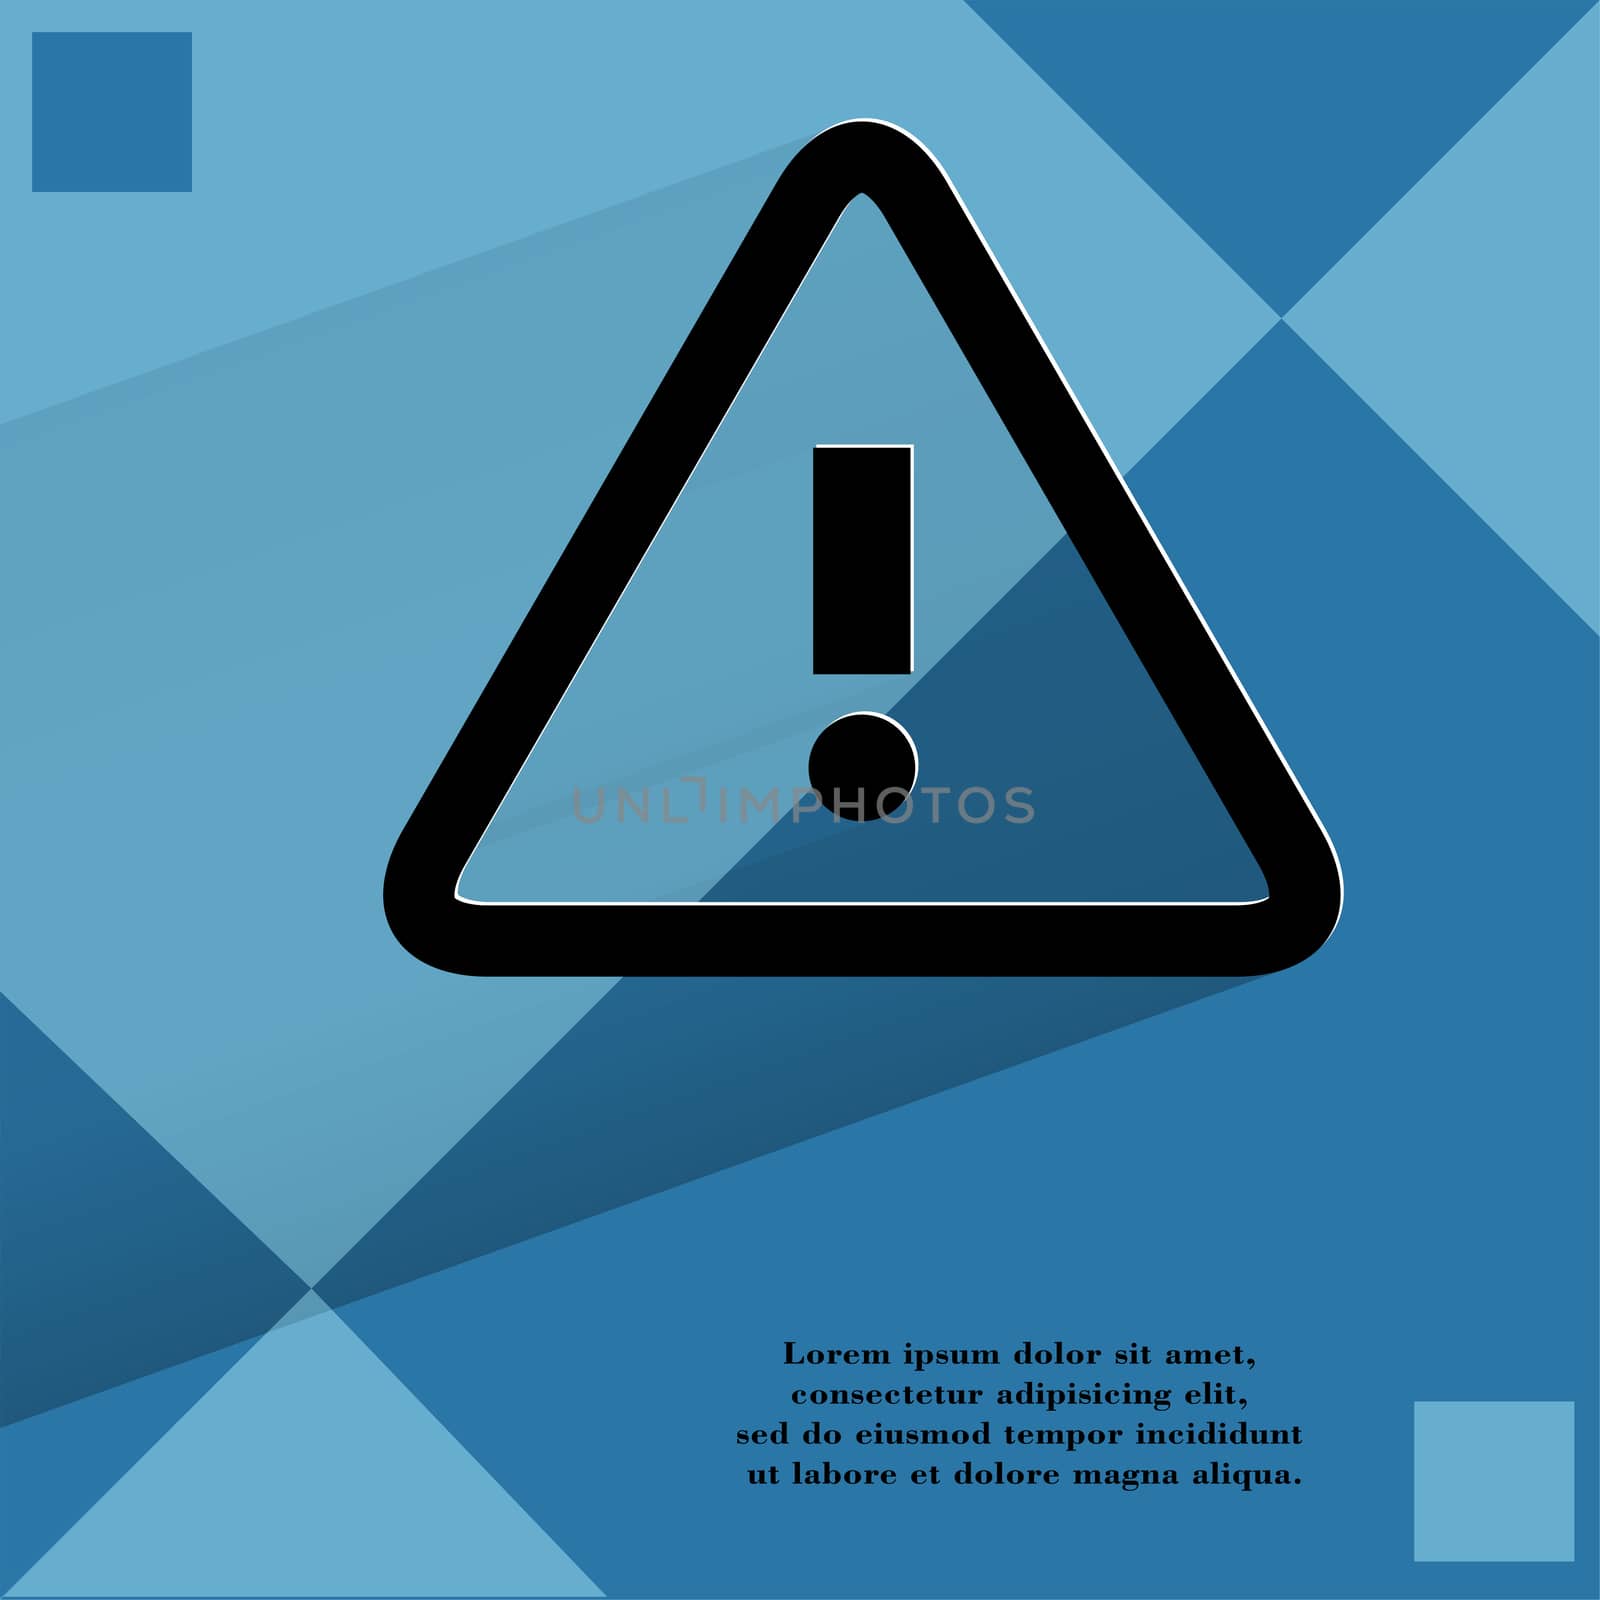 danger. exclamation mark. Flat modern web design on a flat geometric abstract background . 